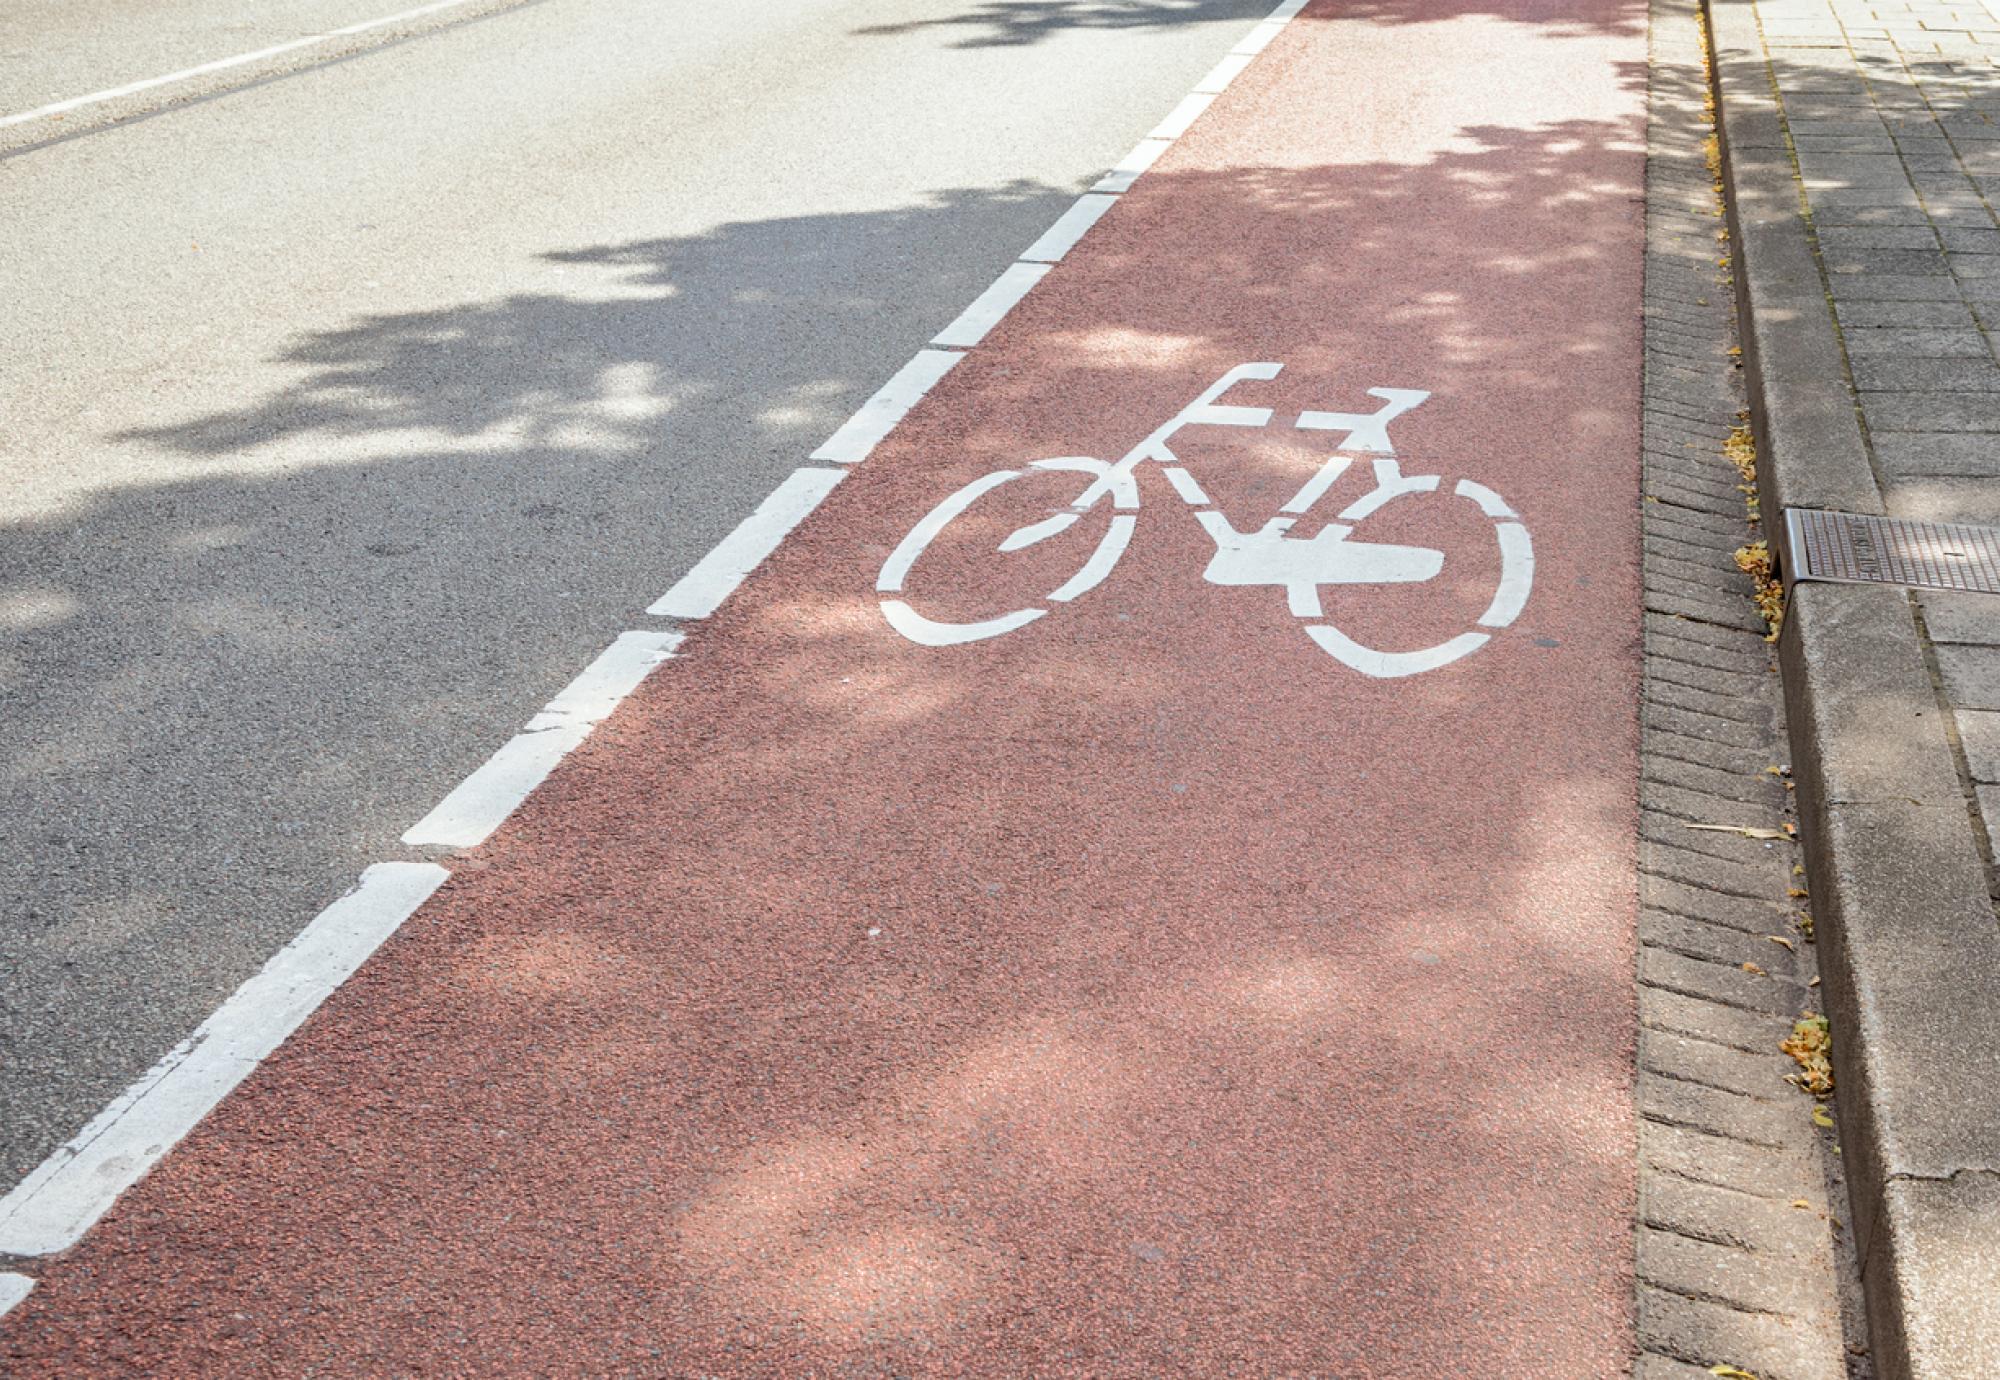 Red bicycle lane along a street in a city centre